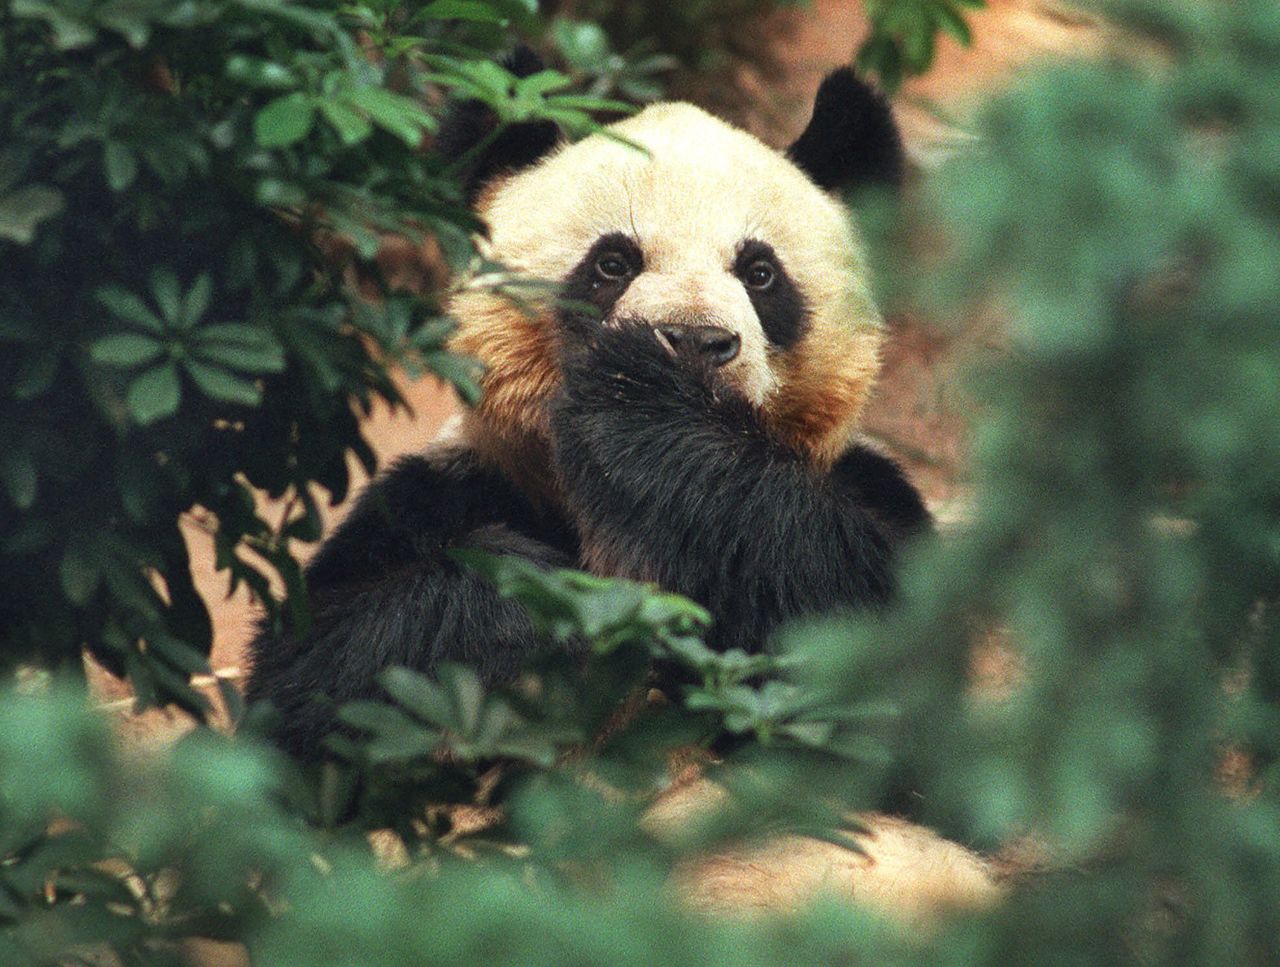 An An, a 14-year-old giant panda, one of two giant pandas given to Hong Kong as a handover gift from China, covers his mouth with his paw as he peers through thick vegetation from his enclosed habitat in Hong Kong's Ocean Park in 1999.